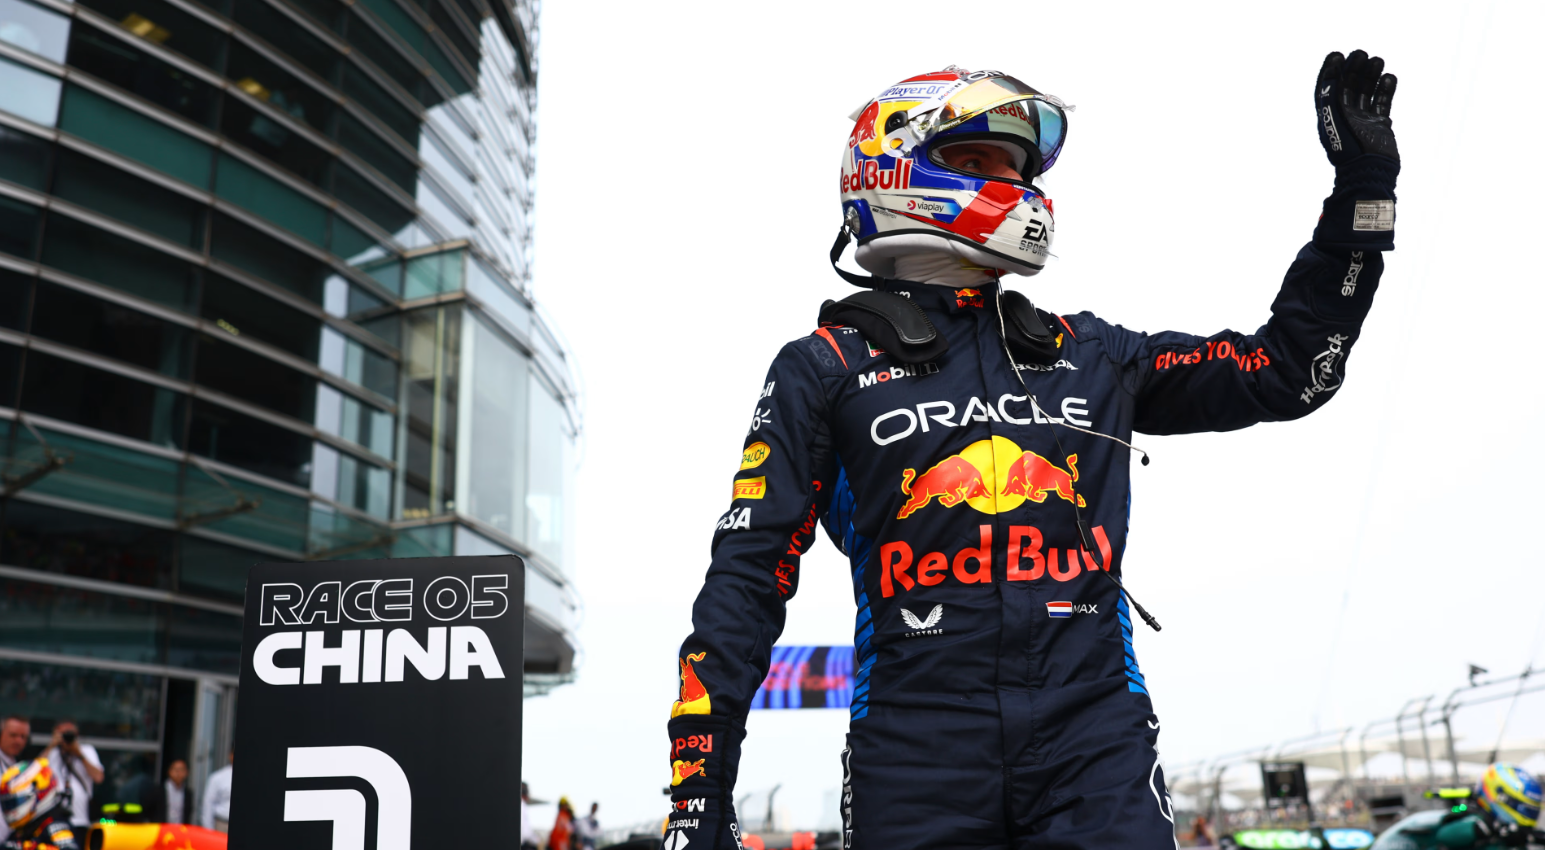 Verstappen cruises to Chinese Grand Prix win, Norris takes second 41